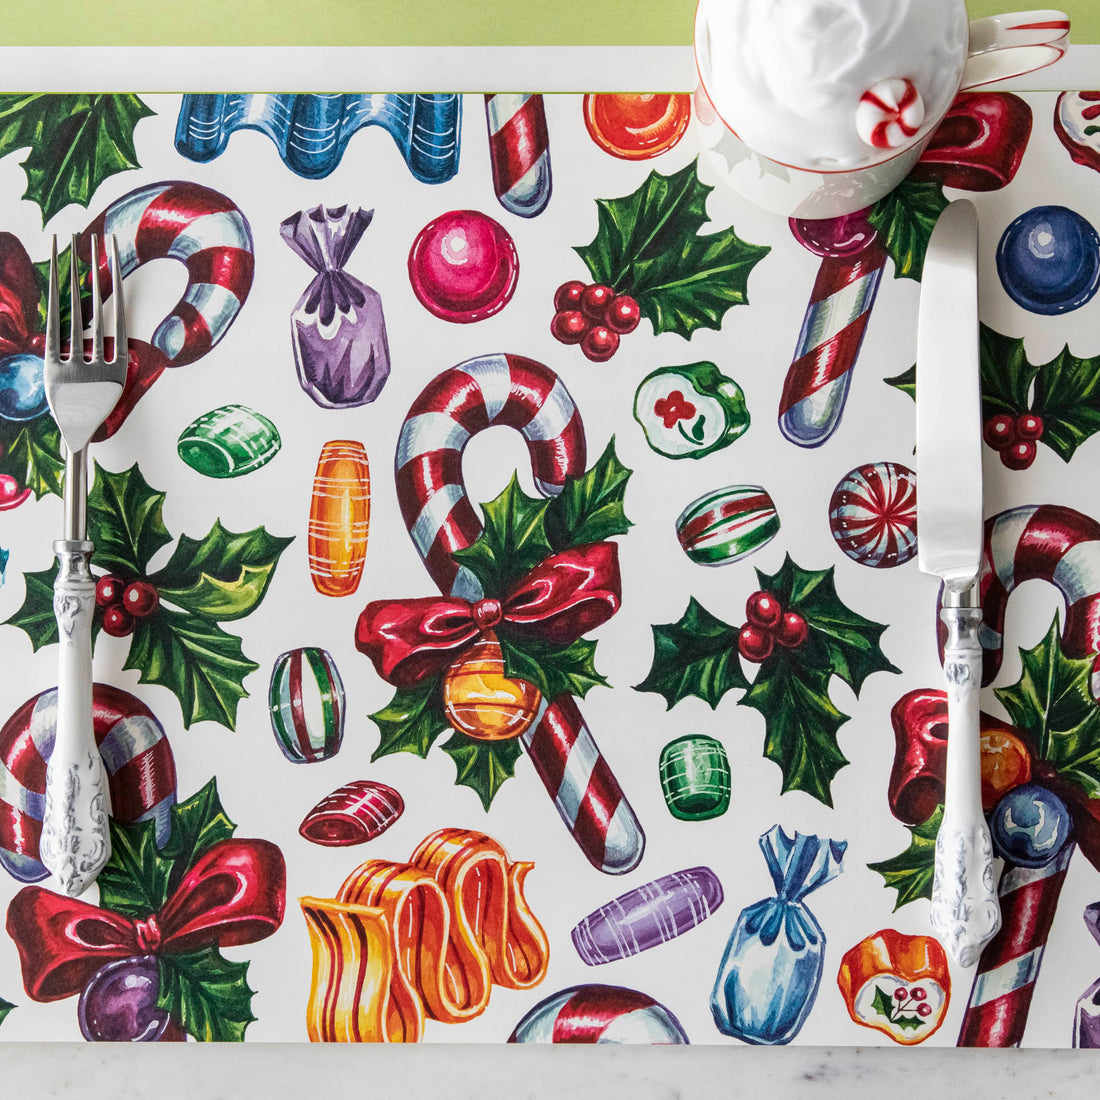 The Candy Cane Shoppe Placemat under a festive Christmas-themed place setting.